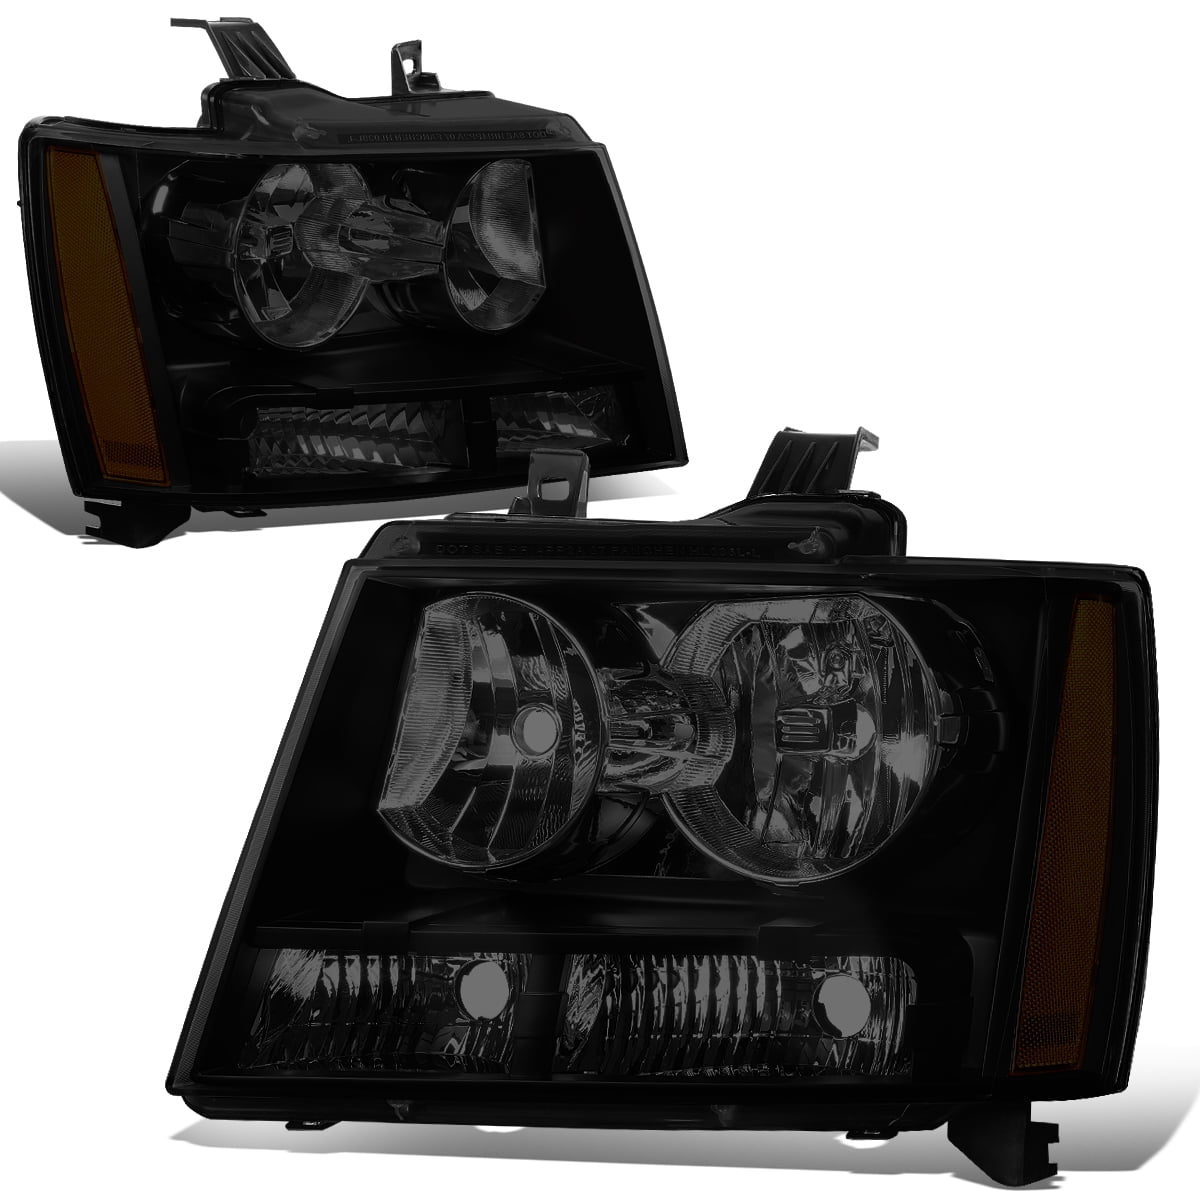 Details about   For 07-14 Tahoe Suburban OE Style Tinted/Amber Corner Headlights Replacement